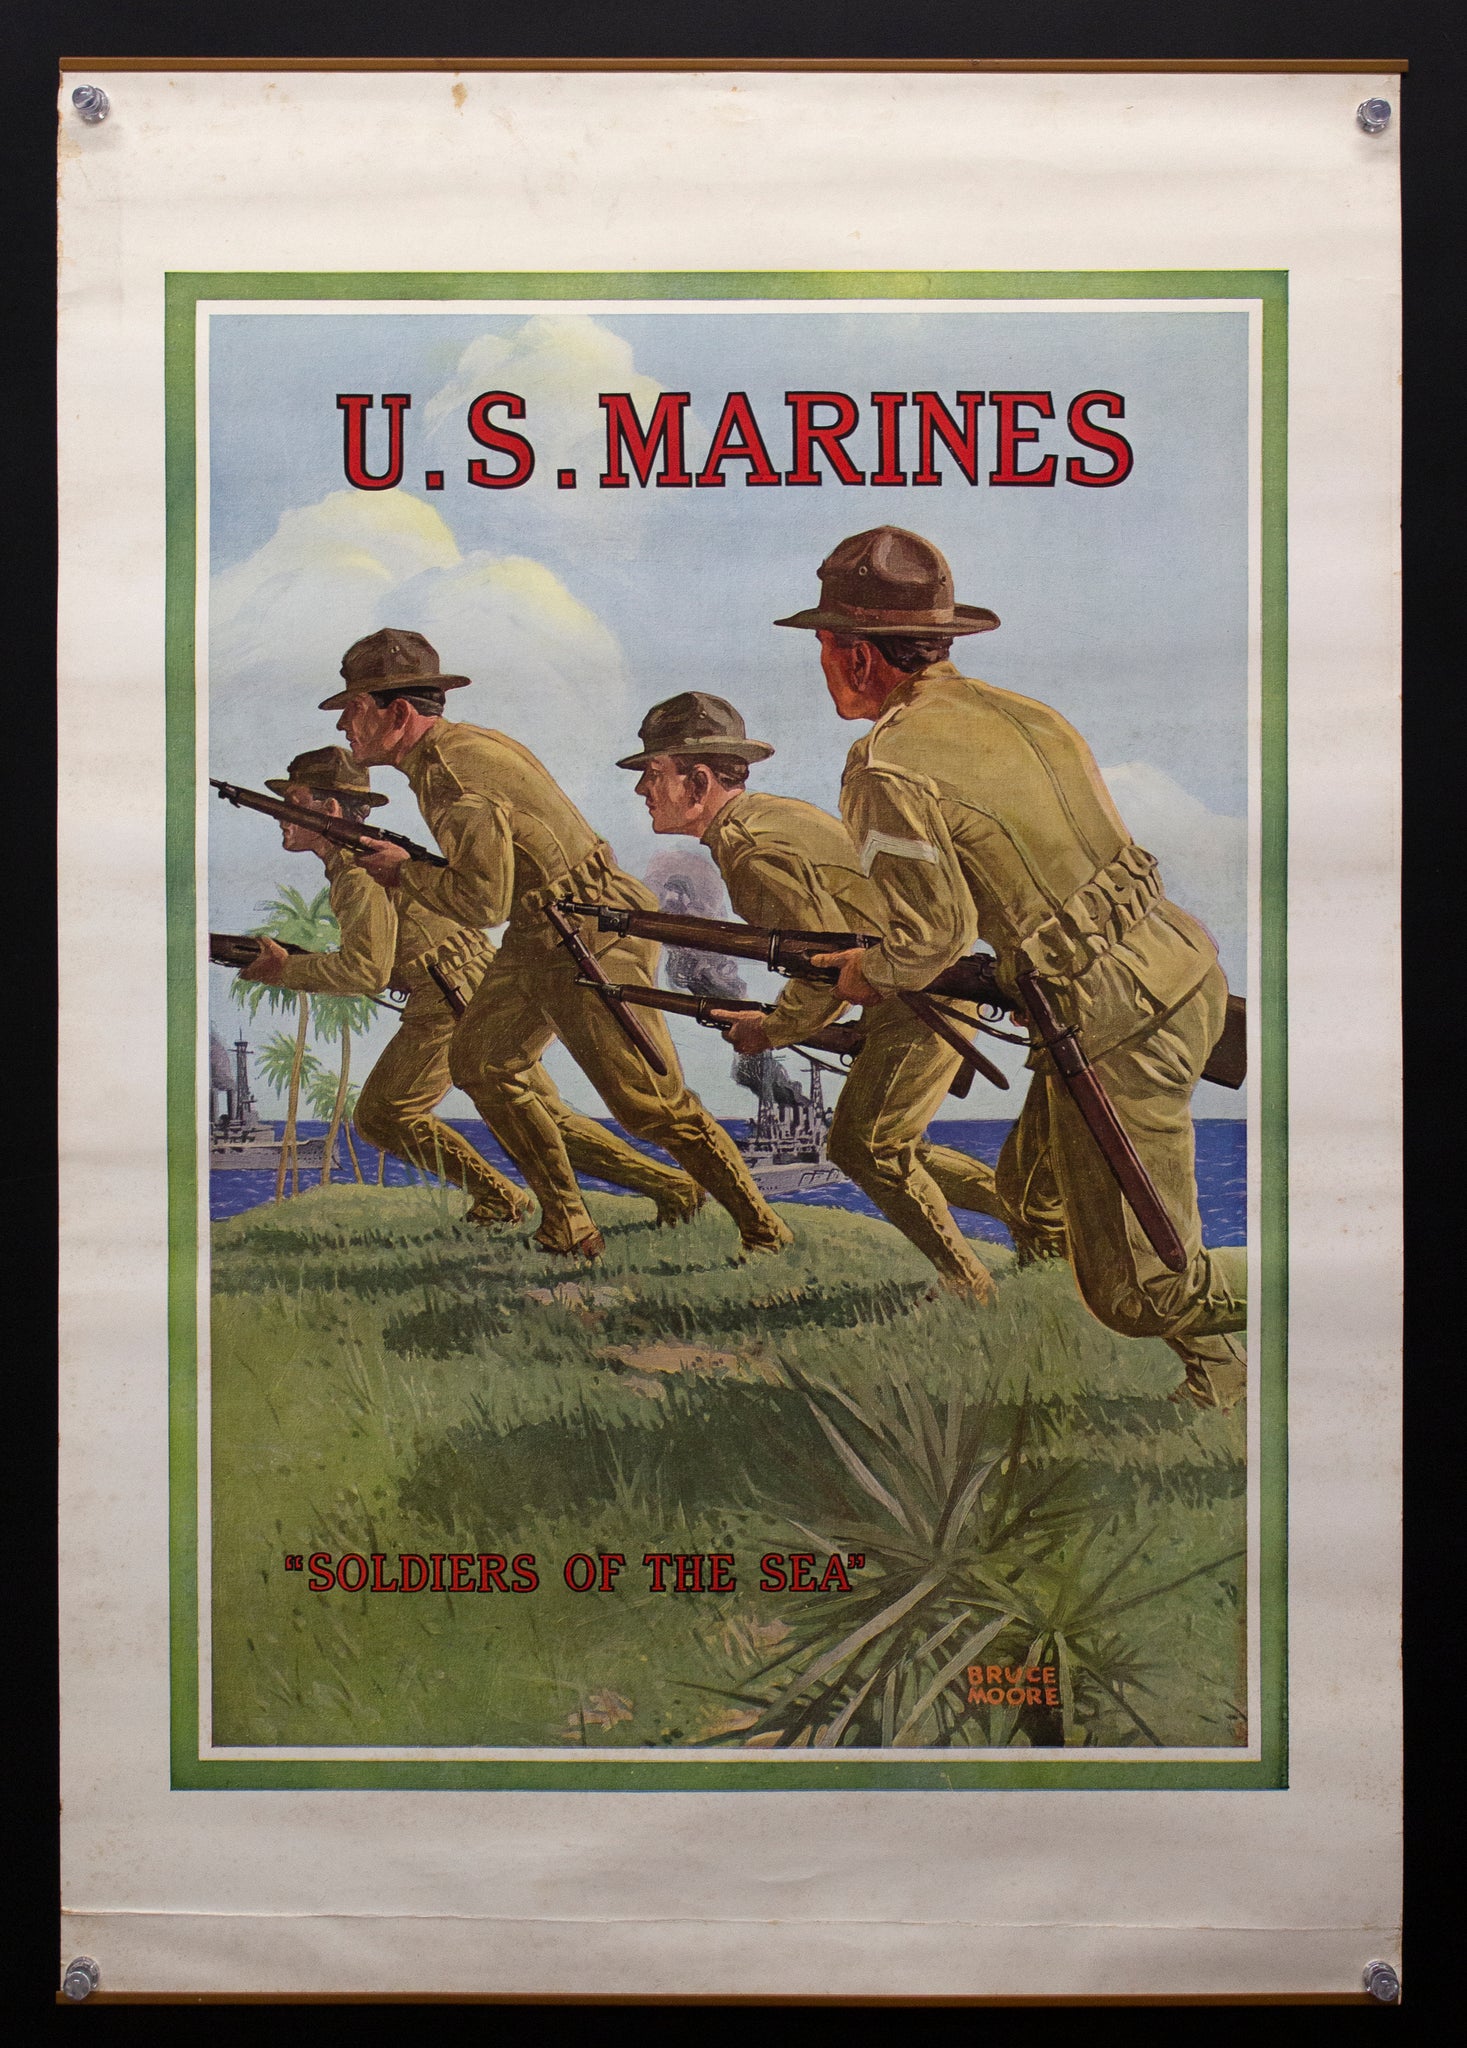 1918 U.S. Marines Soldiers of the Sea by Bruce Moore WWI USMC Marine Corps